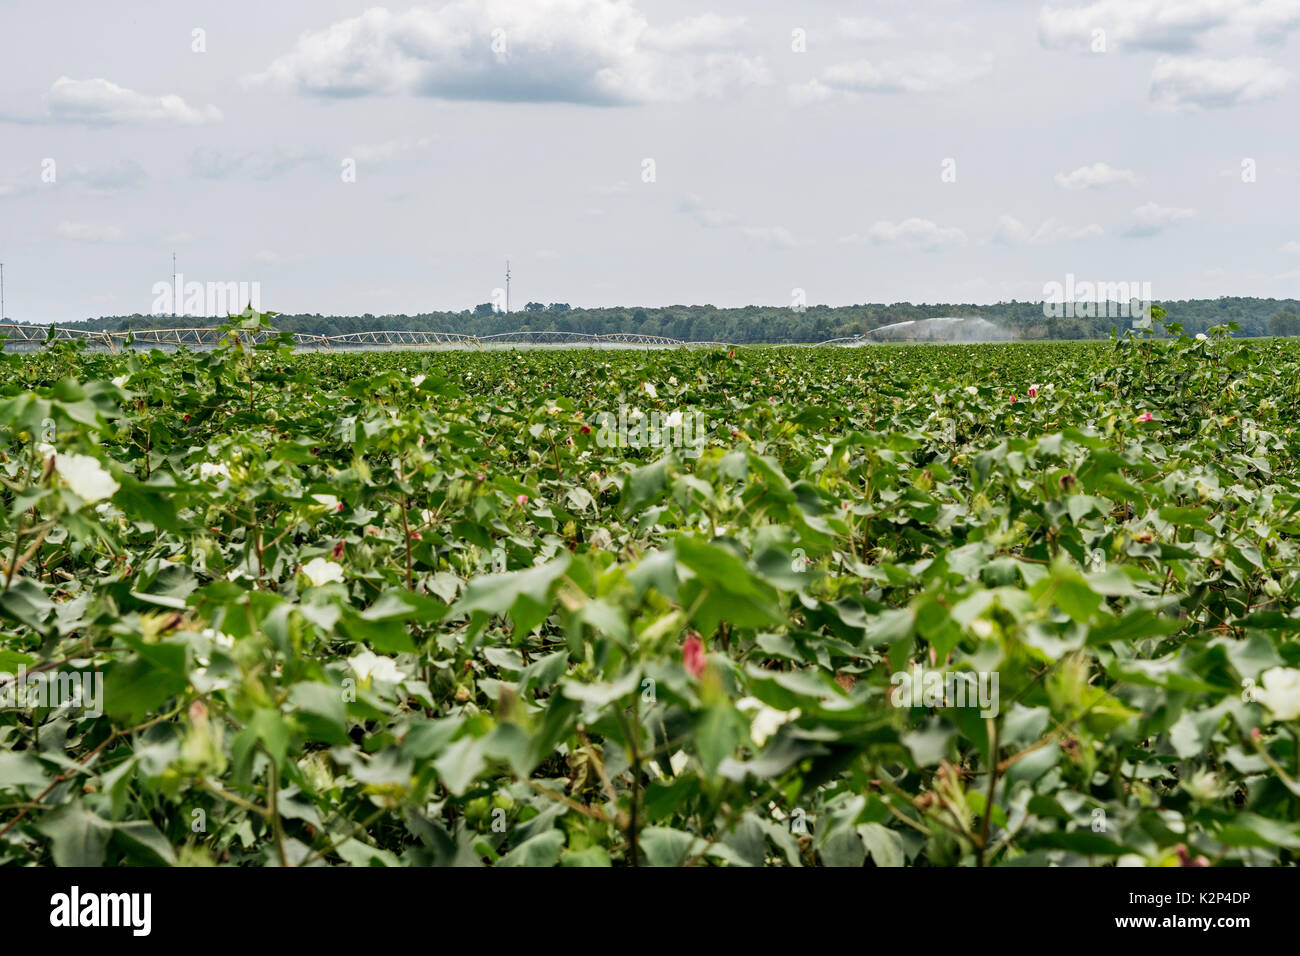 Large cotton farm in central Alabama, USA, at mid season peak showing healthy growth, or high cotton. The cotton plants are in full bloom. Stock Photo